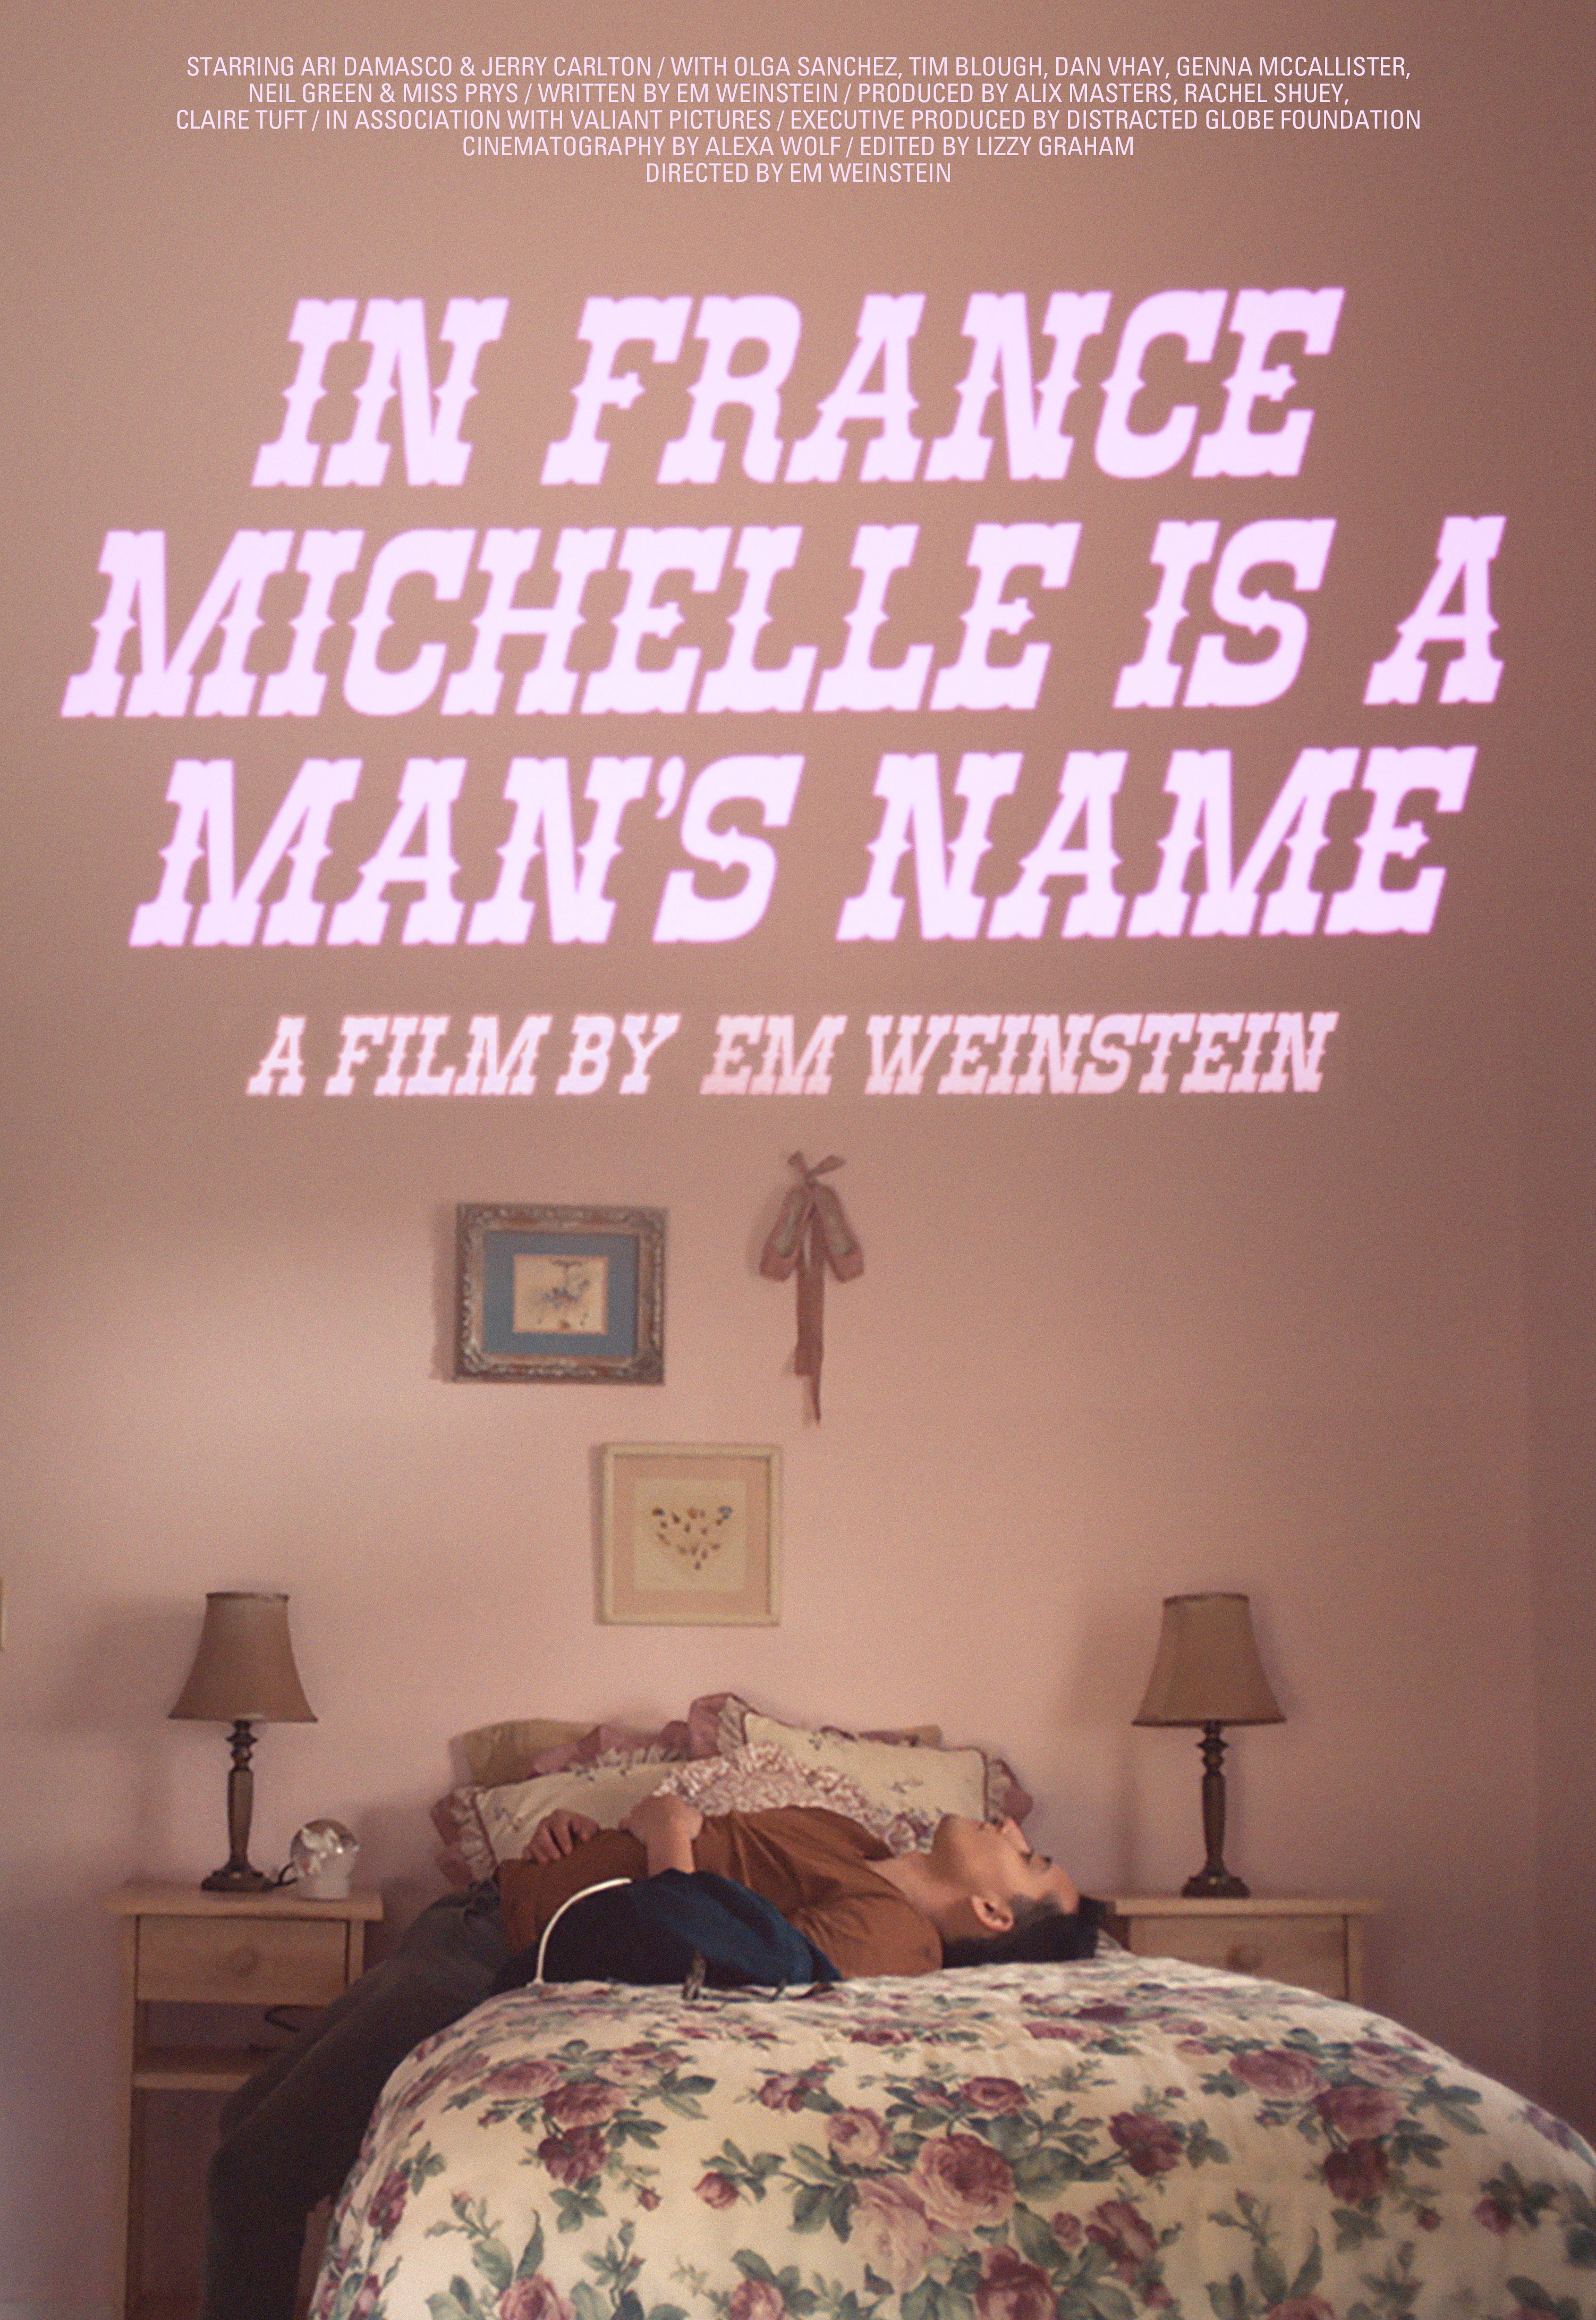 The cover art for the film In France Michelle is a Man's Name. 